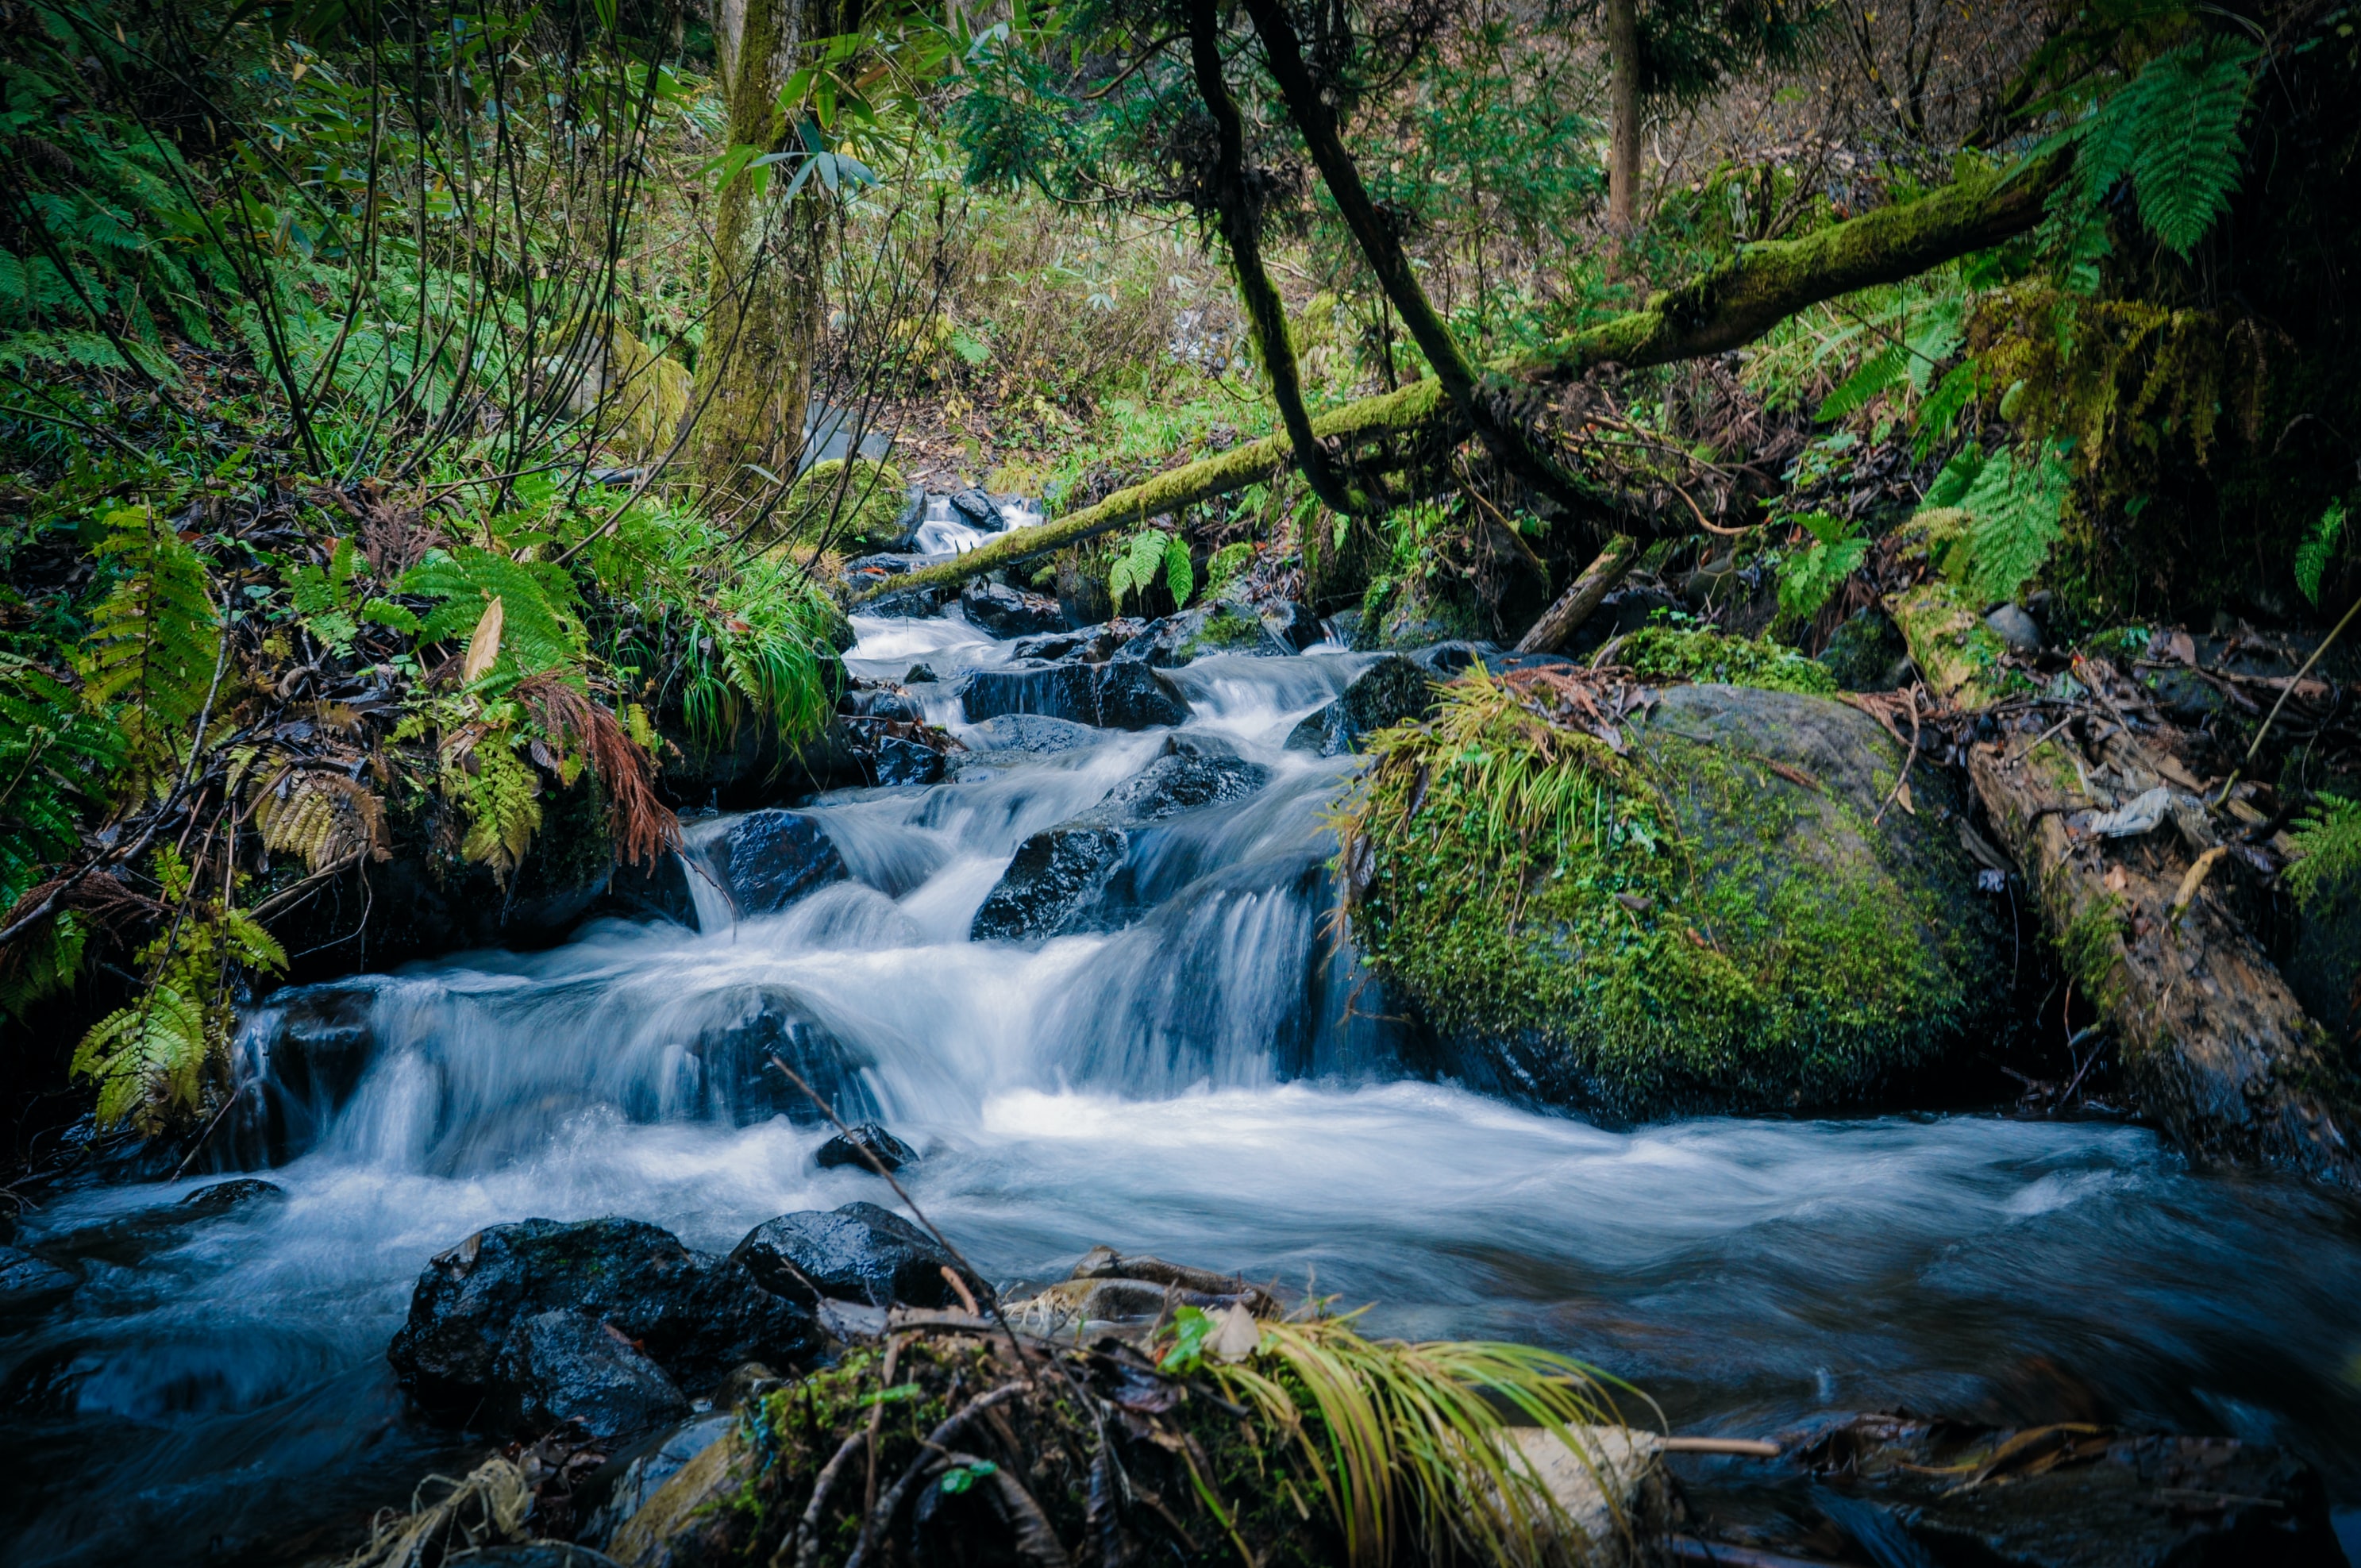 Water flowing down rocks in a stream surrounded by mossy vegetation